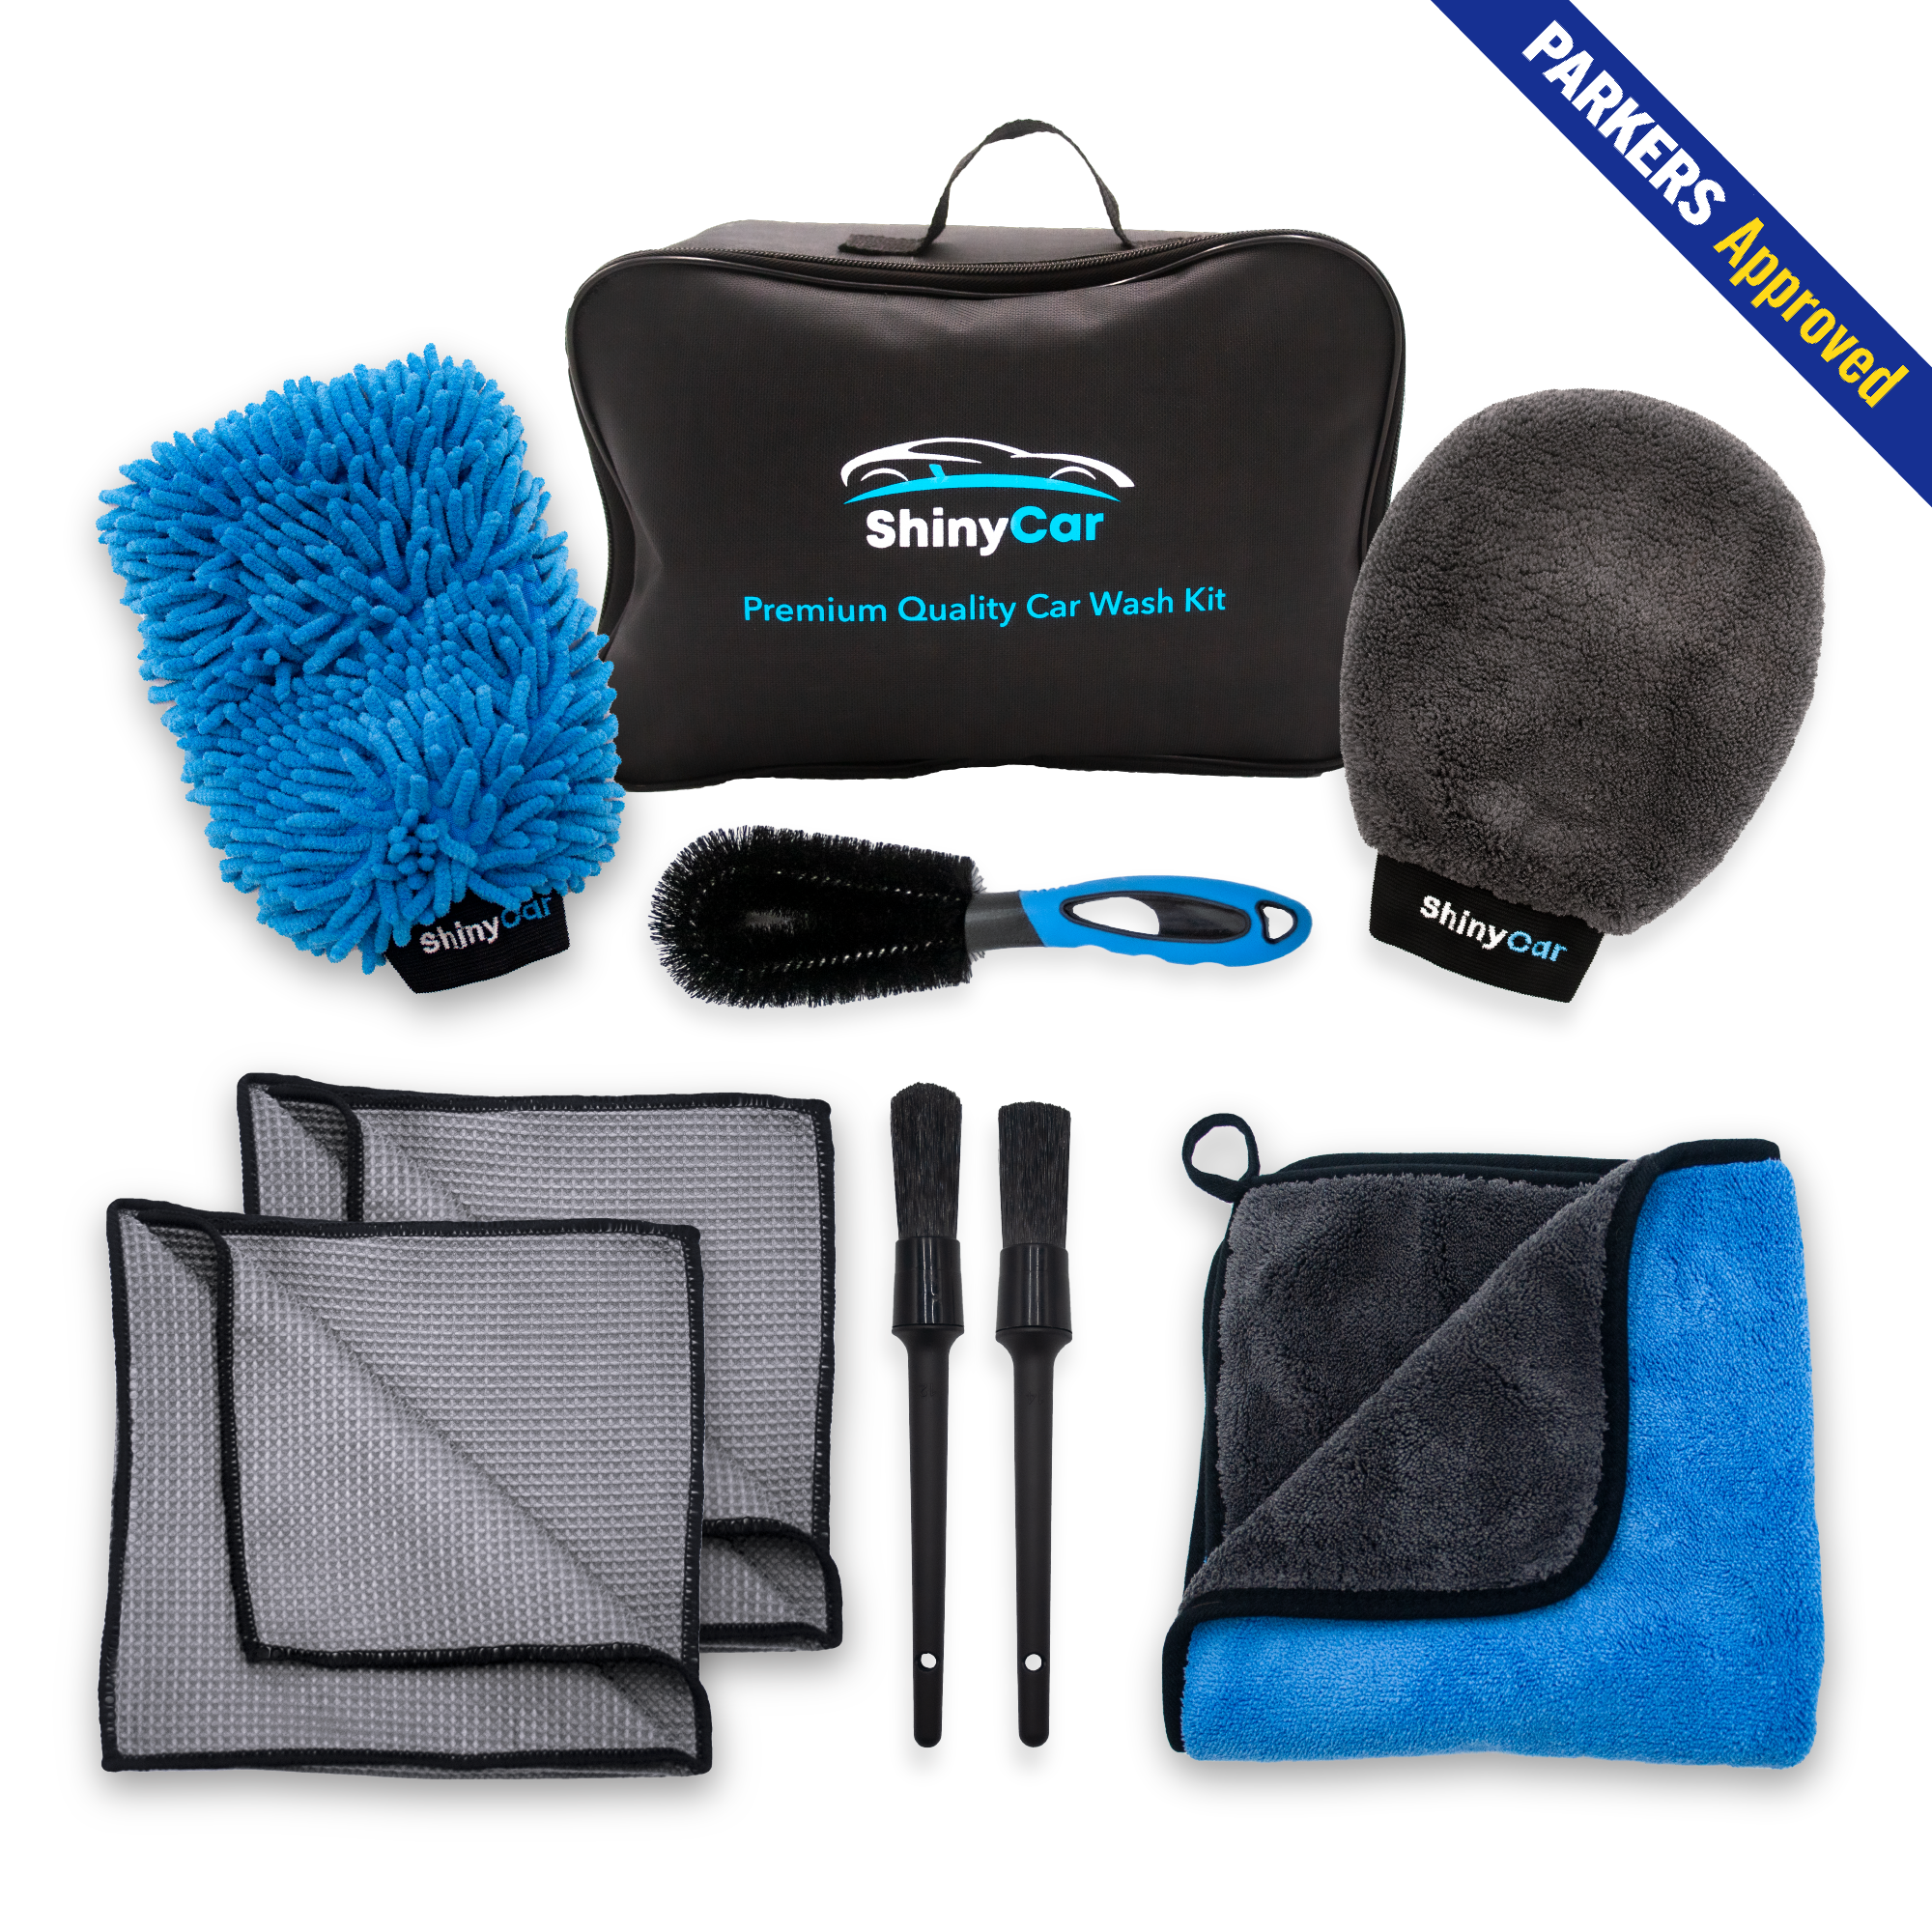 Adam's Arsenal Builder Car Cleaning Kit (6 Item) - Our Best Value Car Detailing Kit | Car Shampoo Wash Soap, Wheel & Tire Cleaner, Total Interior